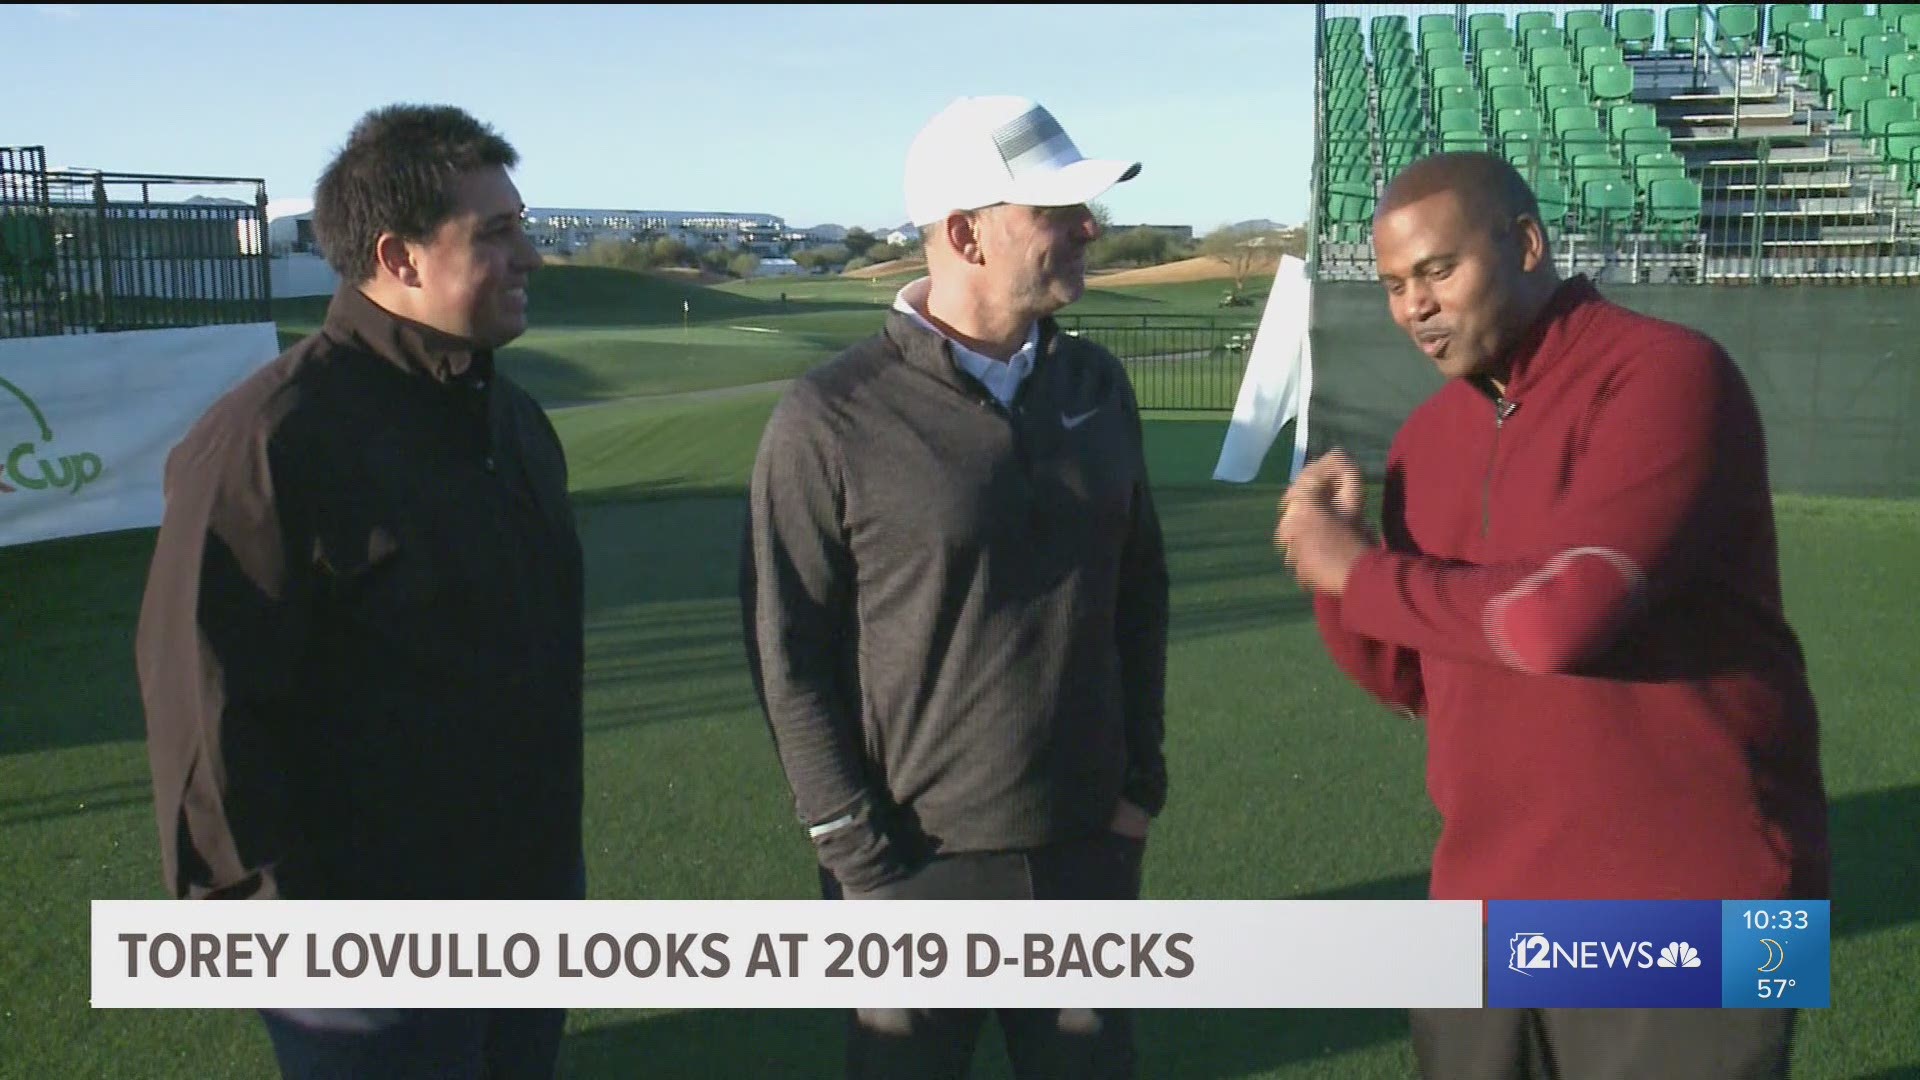 Diamondbacks manager Torey Lovullo discusses his outlook on the upcoming 2019 season during the 12 Sports Golf Show at TPC Scottsdale.